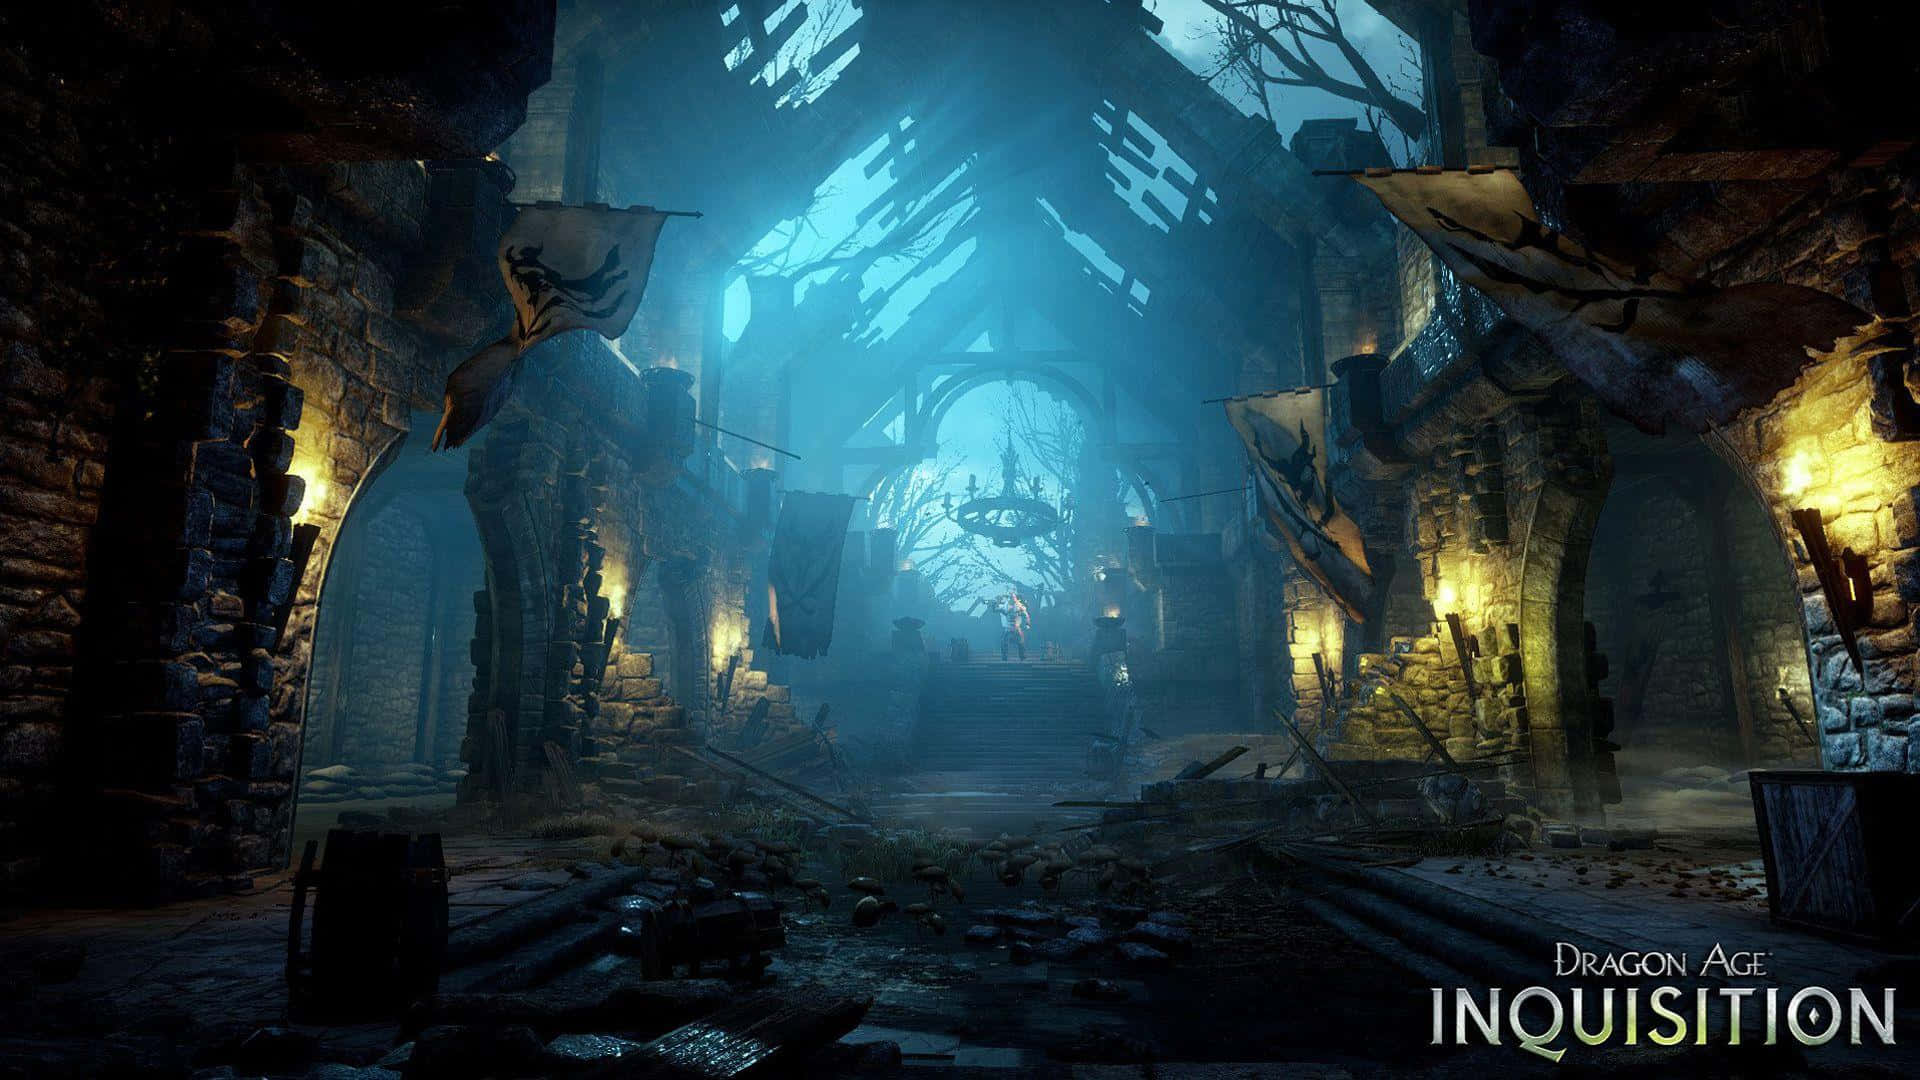 Experience the breathtaking visuals of Dragon Age Inquisition